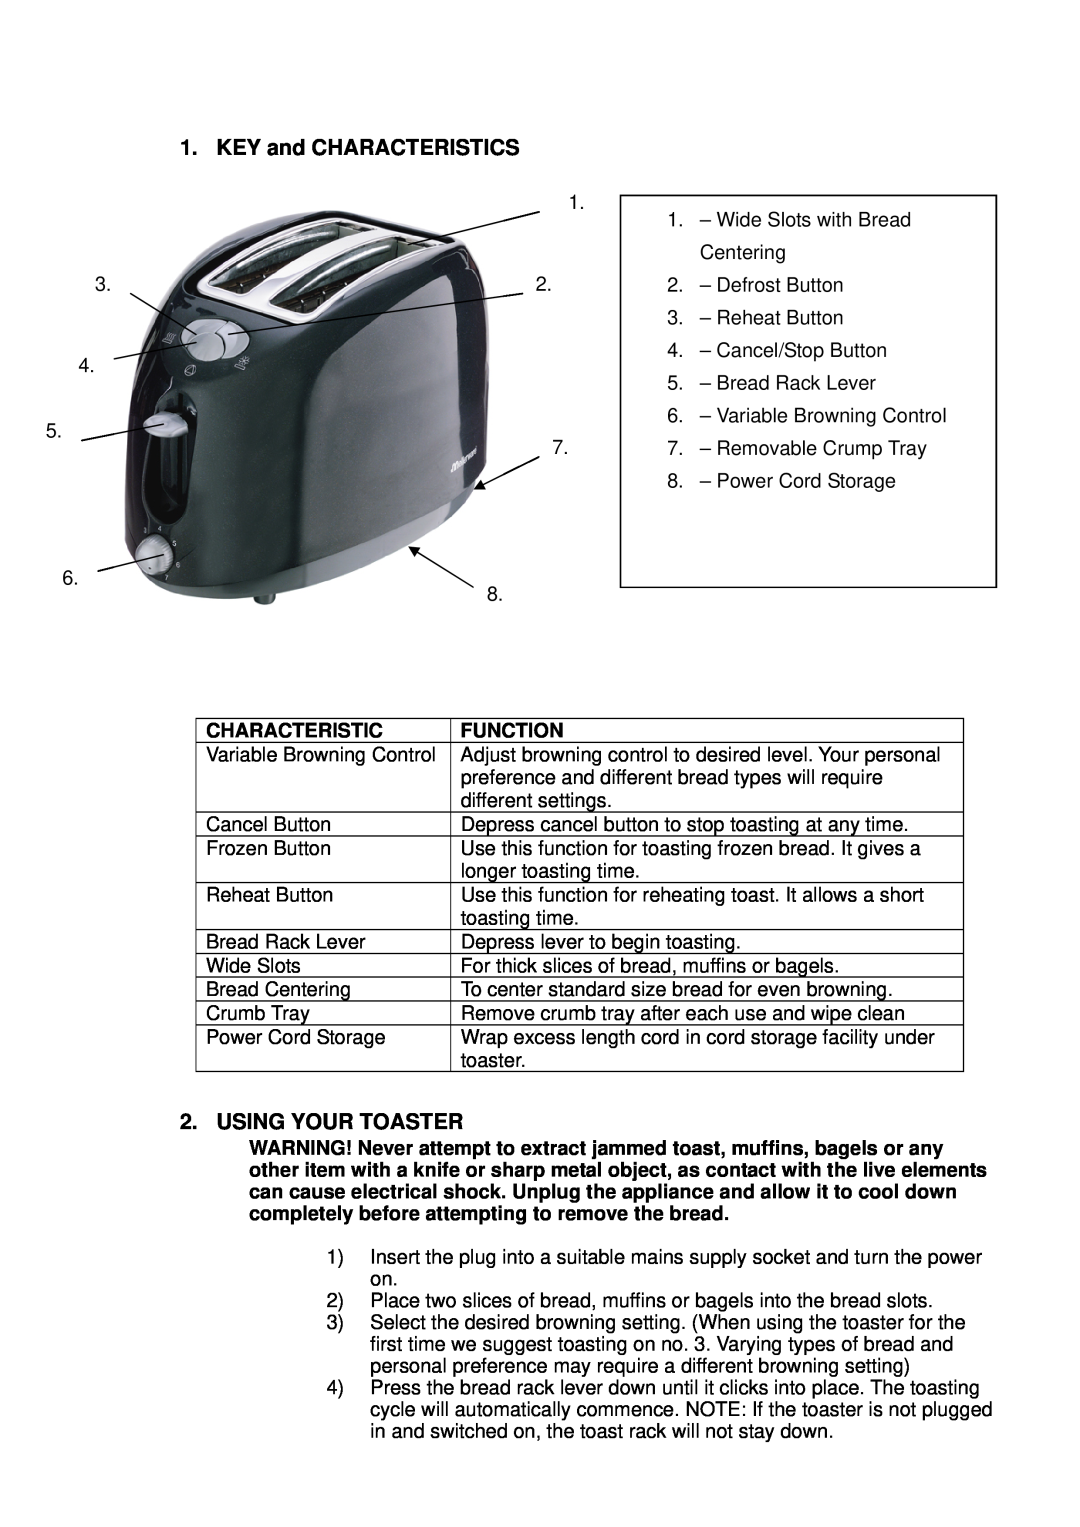 Mellerware 24850 instruction manual KEY and CHARACTERISTICS, Using Your Toaster, Characteristic, Function 